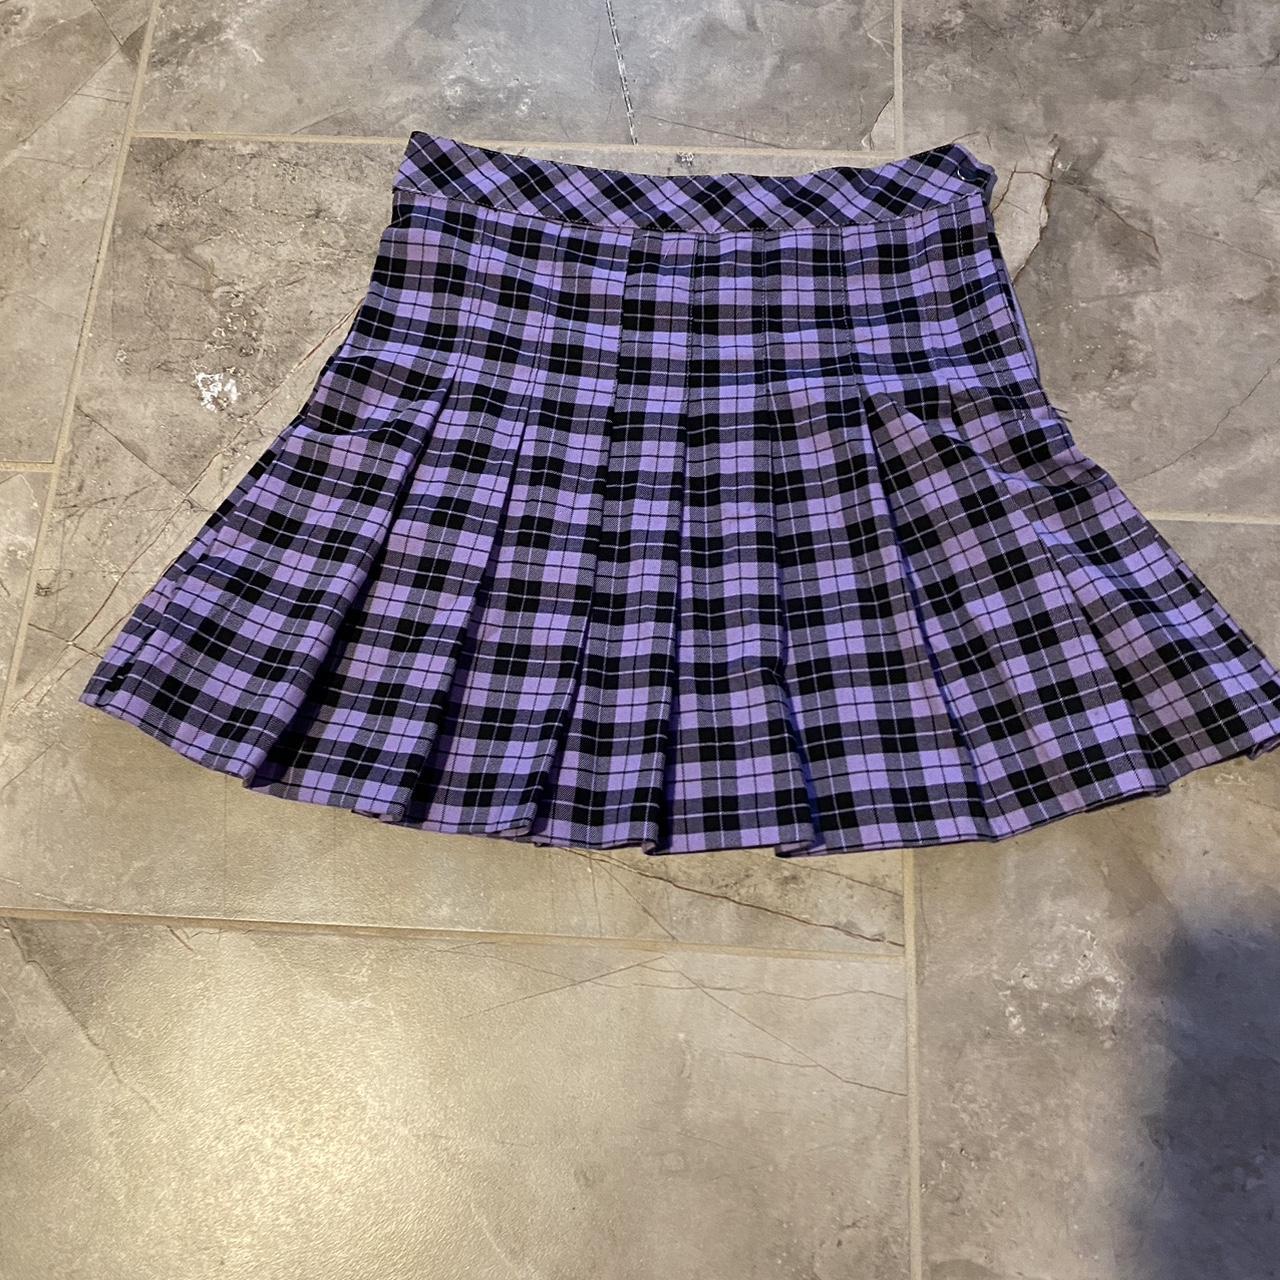 Pleated Black and Purple skirt from H&M - Depop